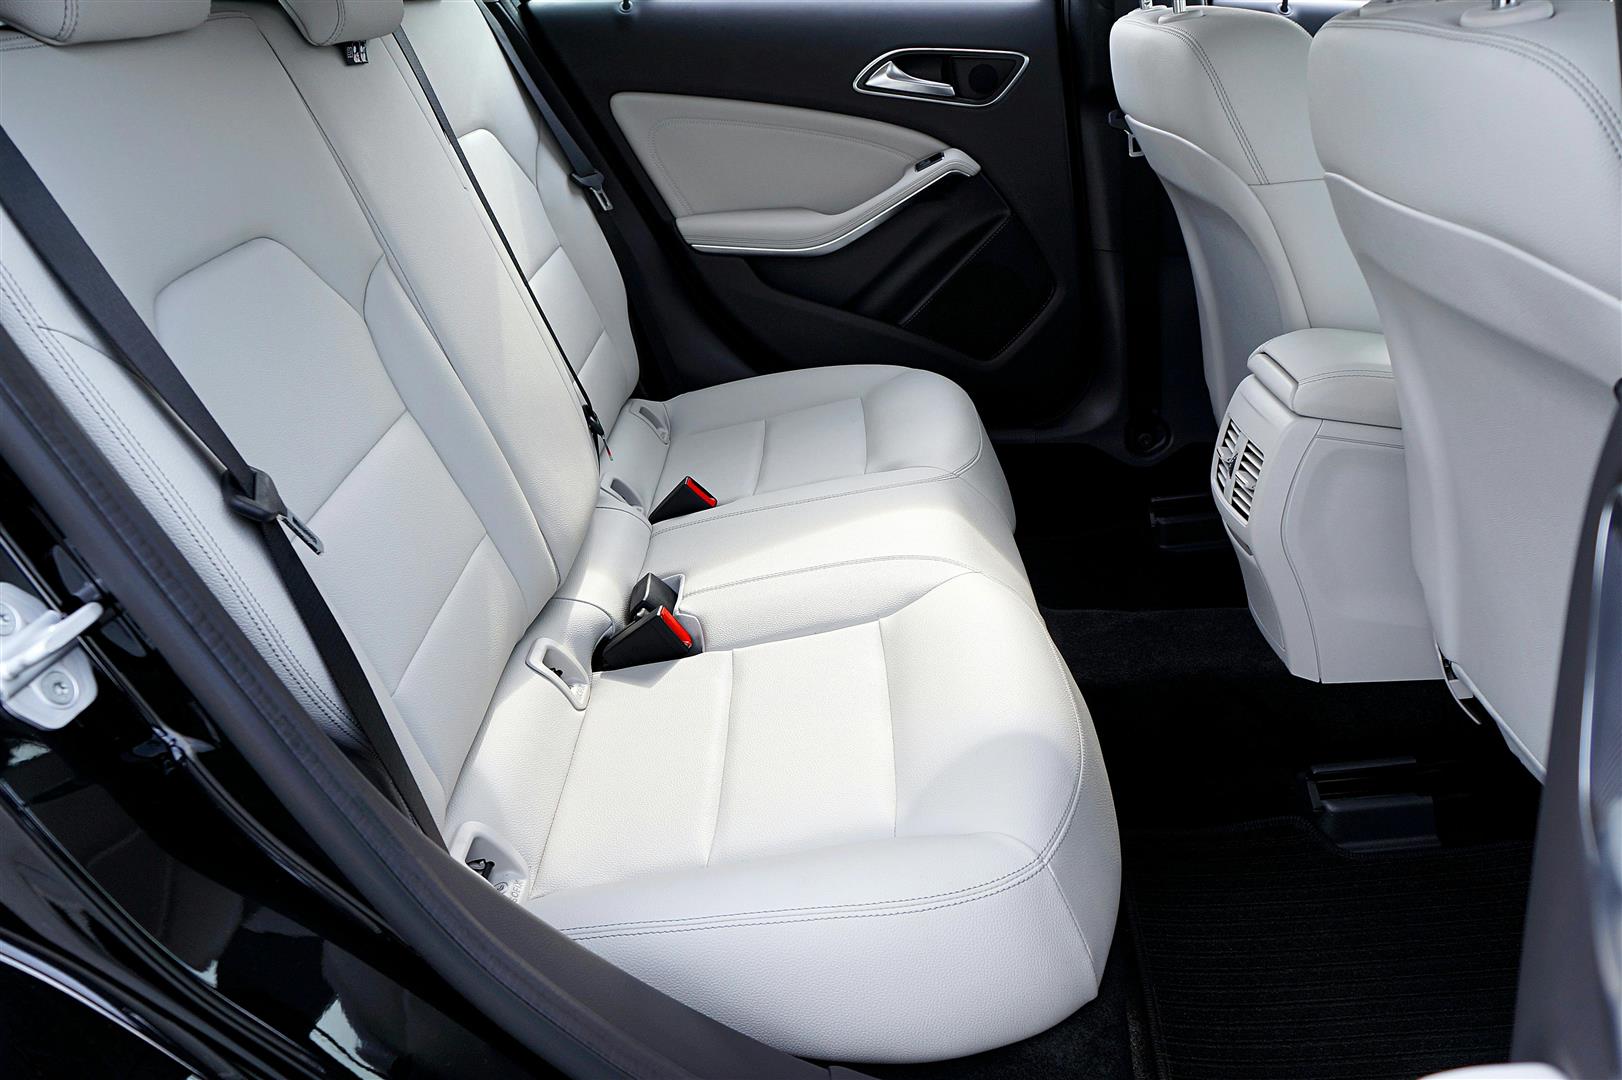  How to Protect Your Car’s Interior from Sun Damage